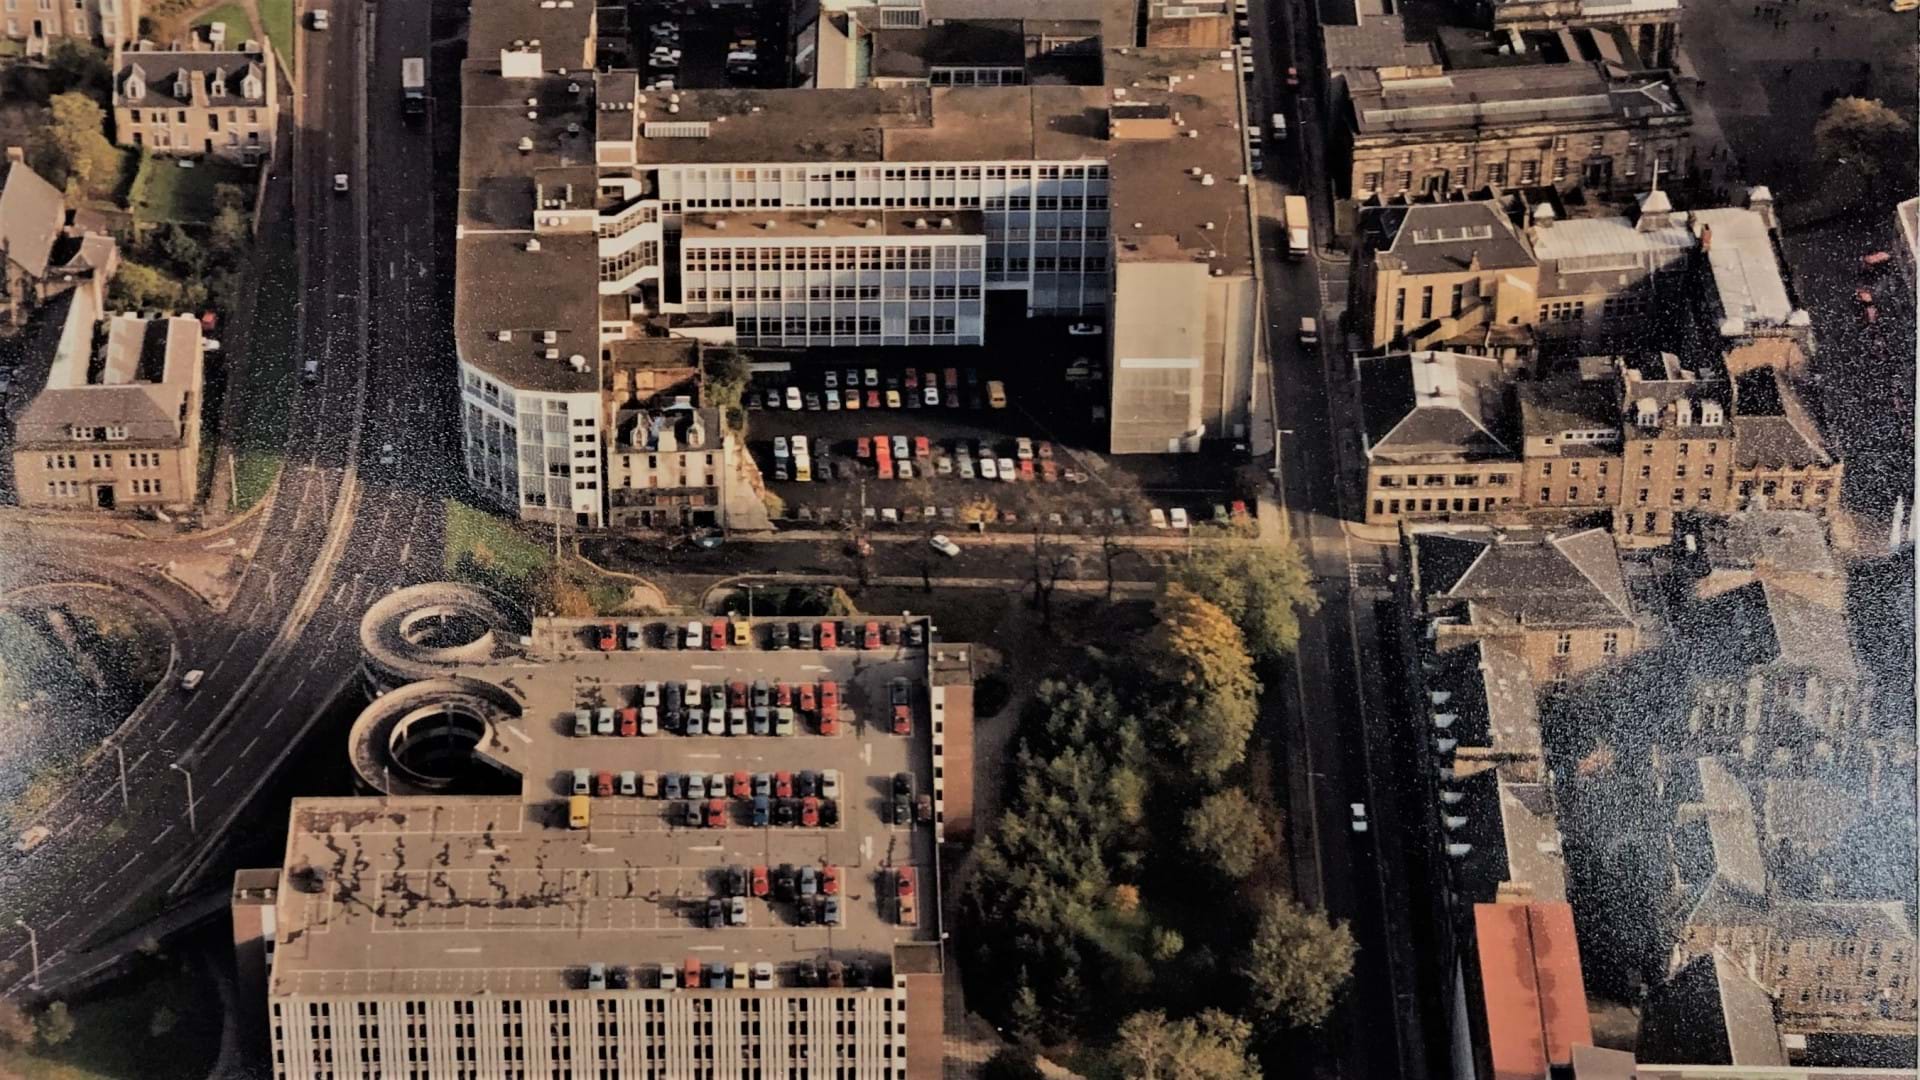 An Aerial view of Dundee Institute of Technology from 1989